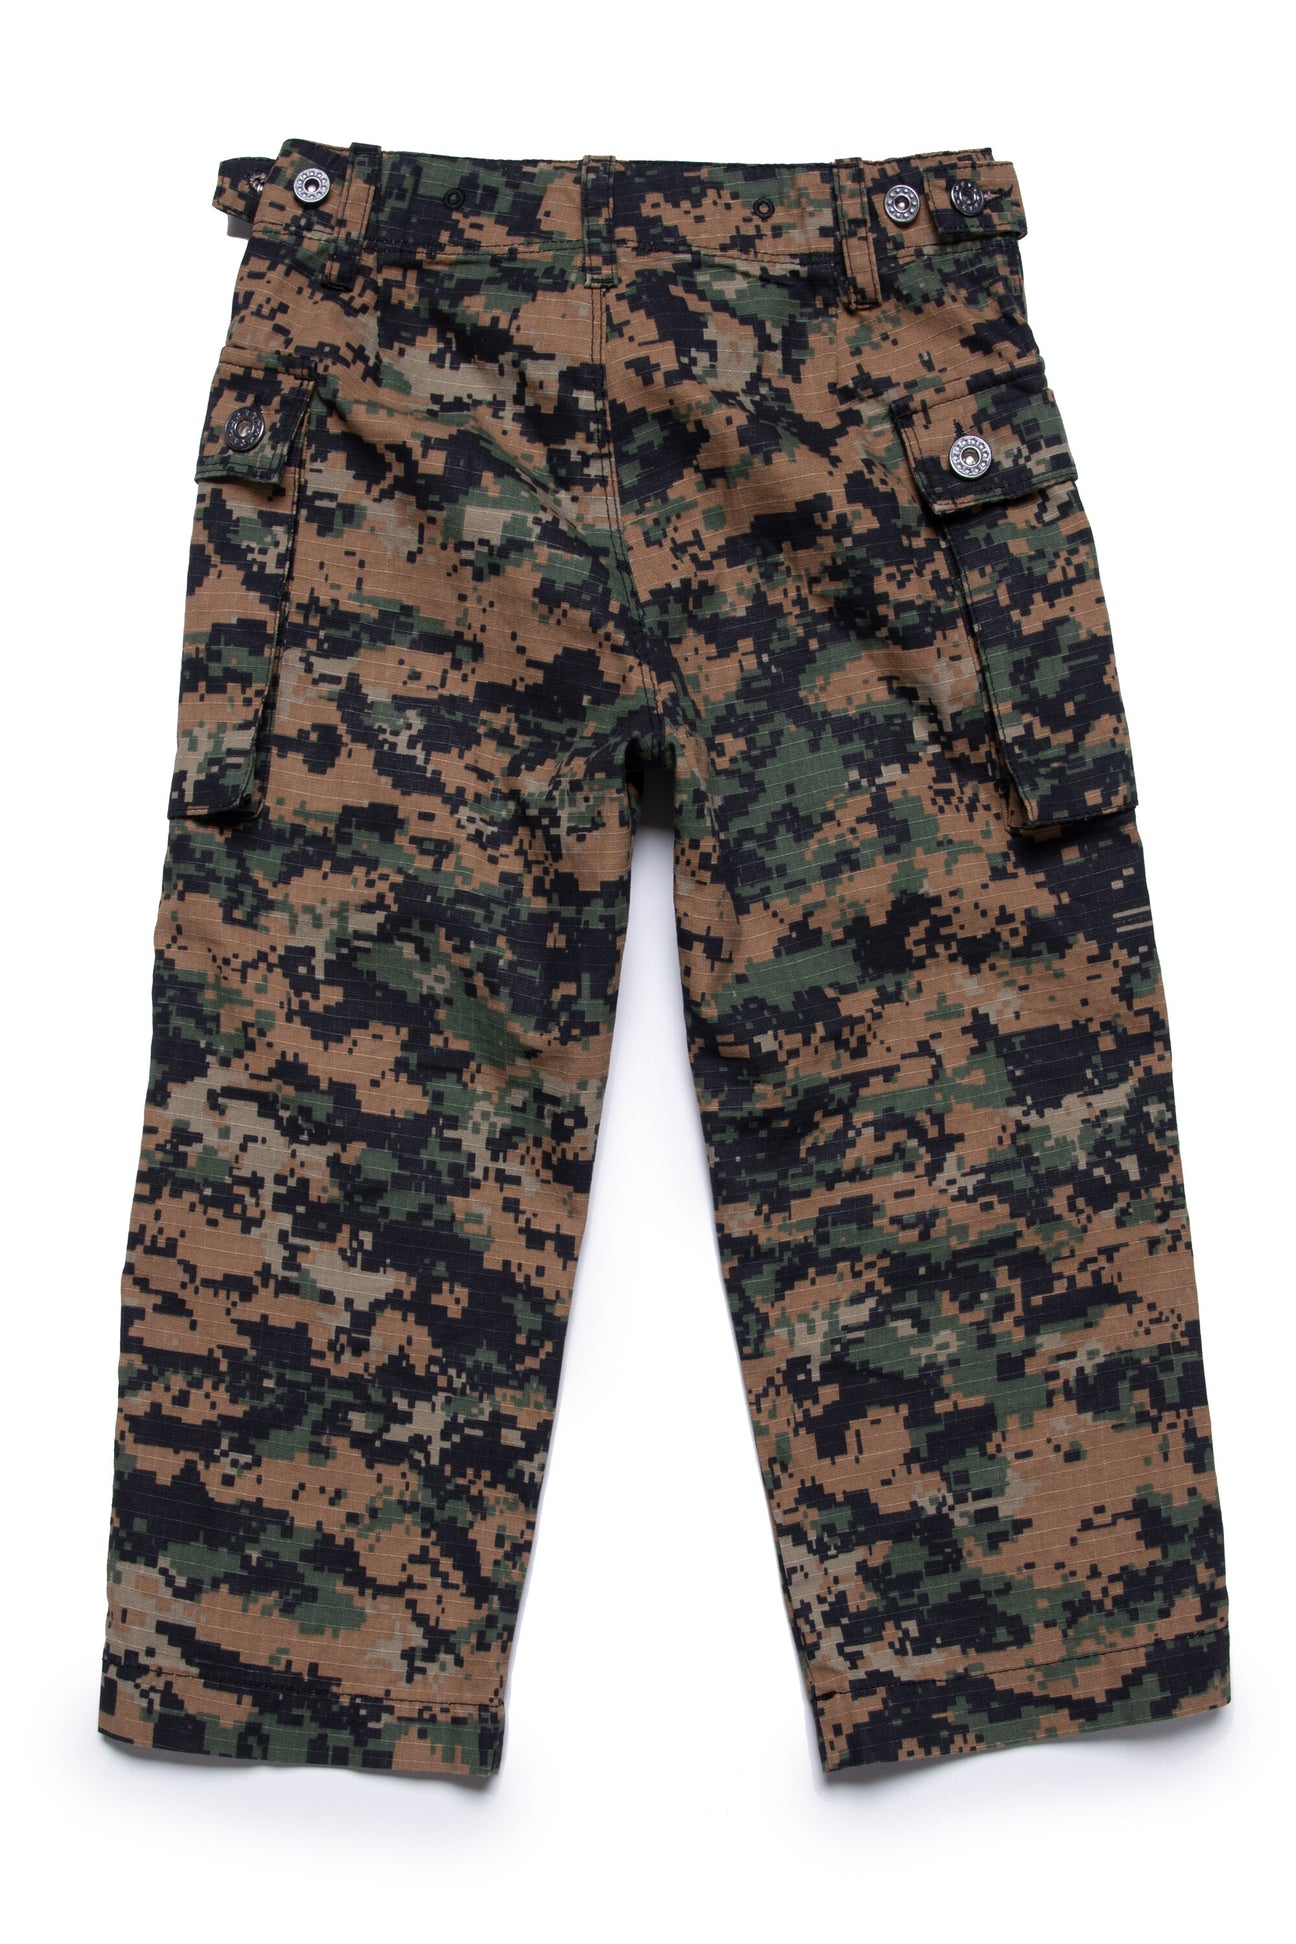 Deadstock fabric camouflage cargo pants Deadstock fabric camouflage cargo pants